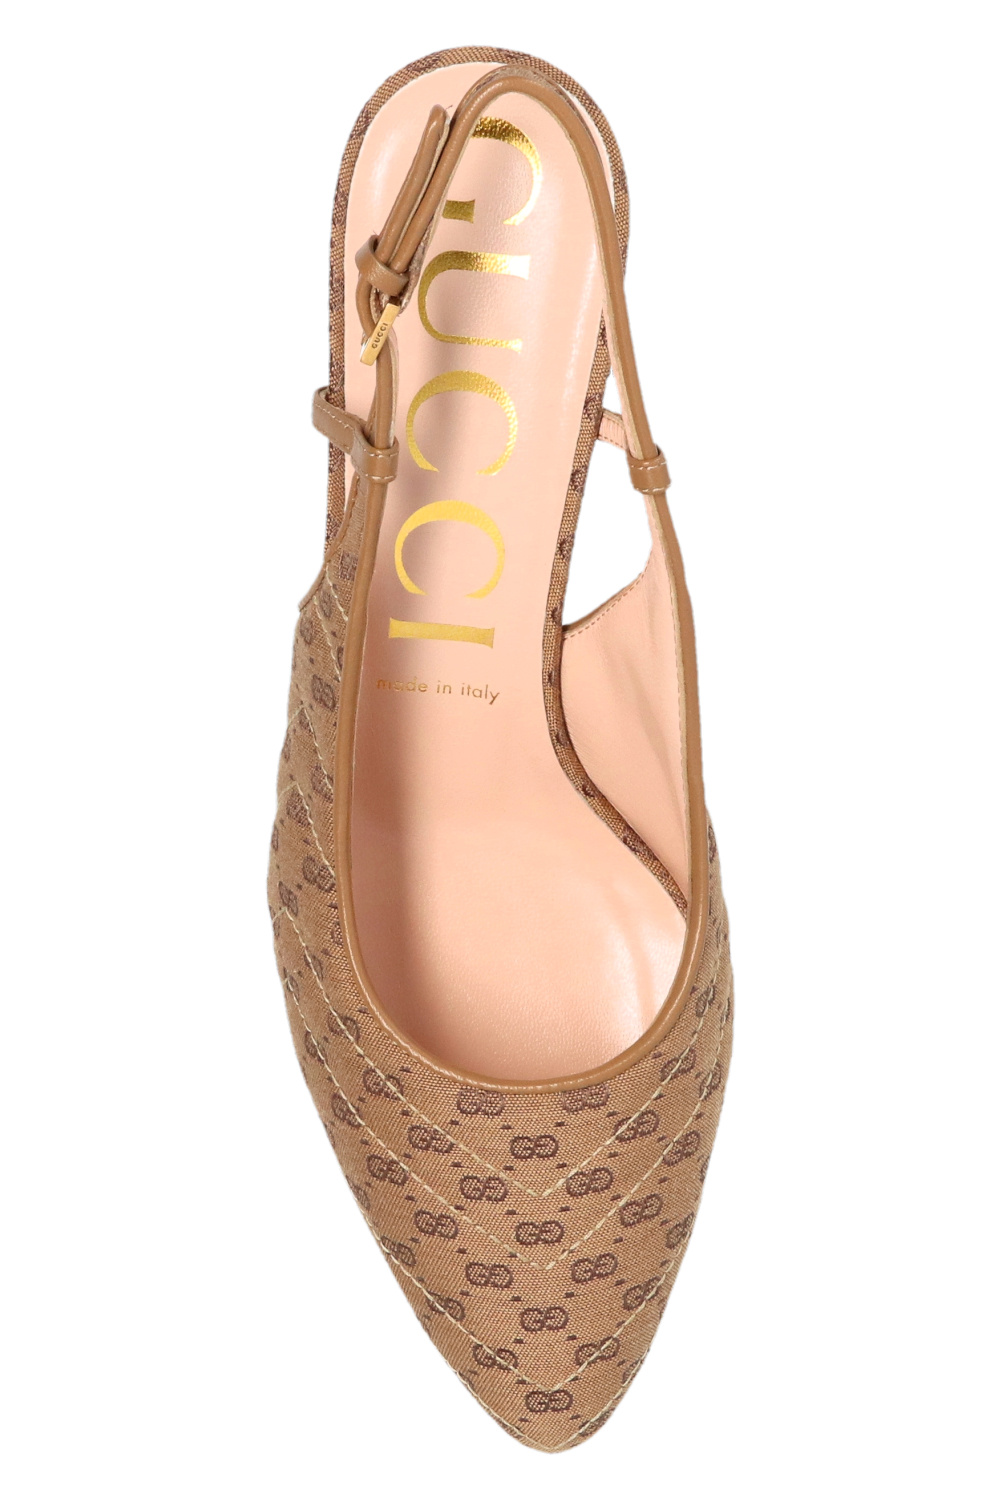 Gucci Slingback pumps with logo